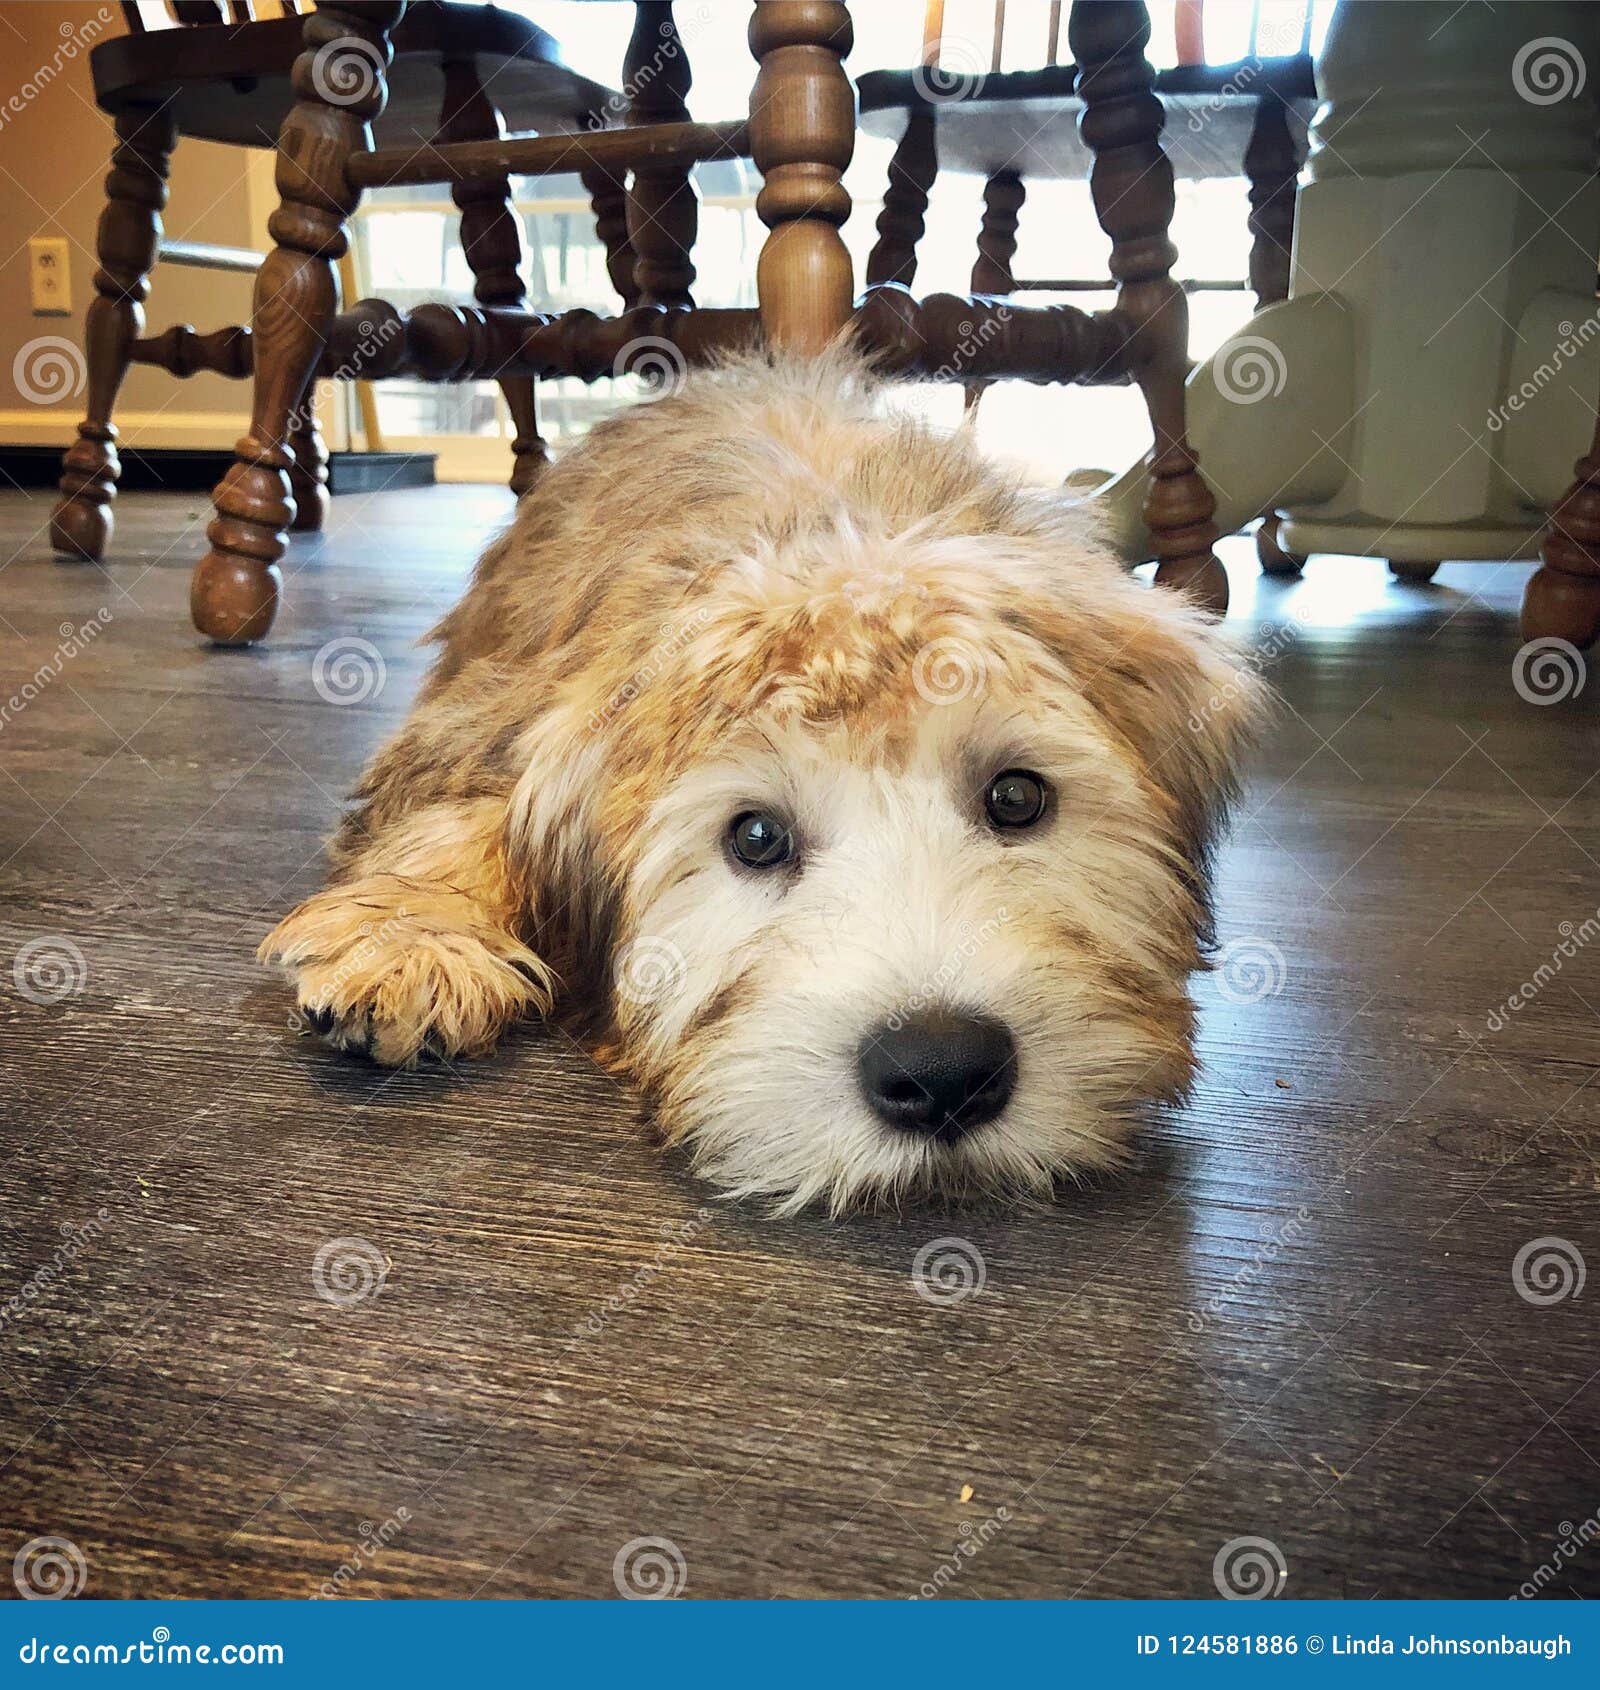 Cute Face Of A Wheaten Terrier Puppy Stock Photo Image Of Animal Gold 124581886